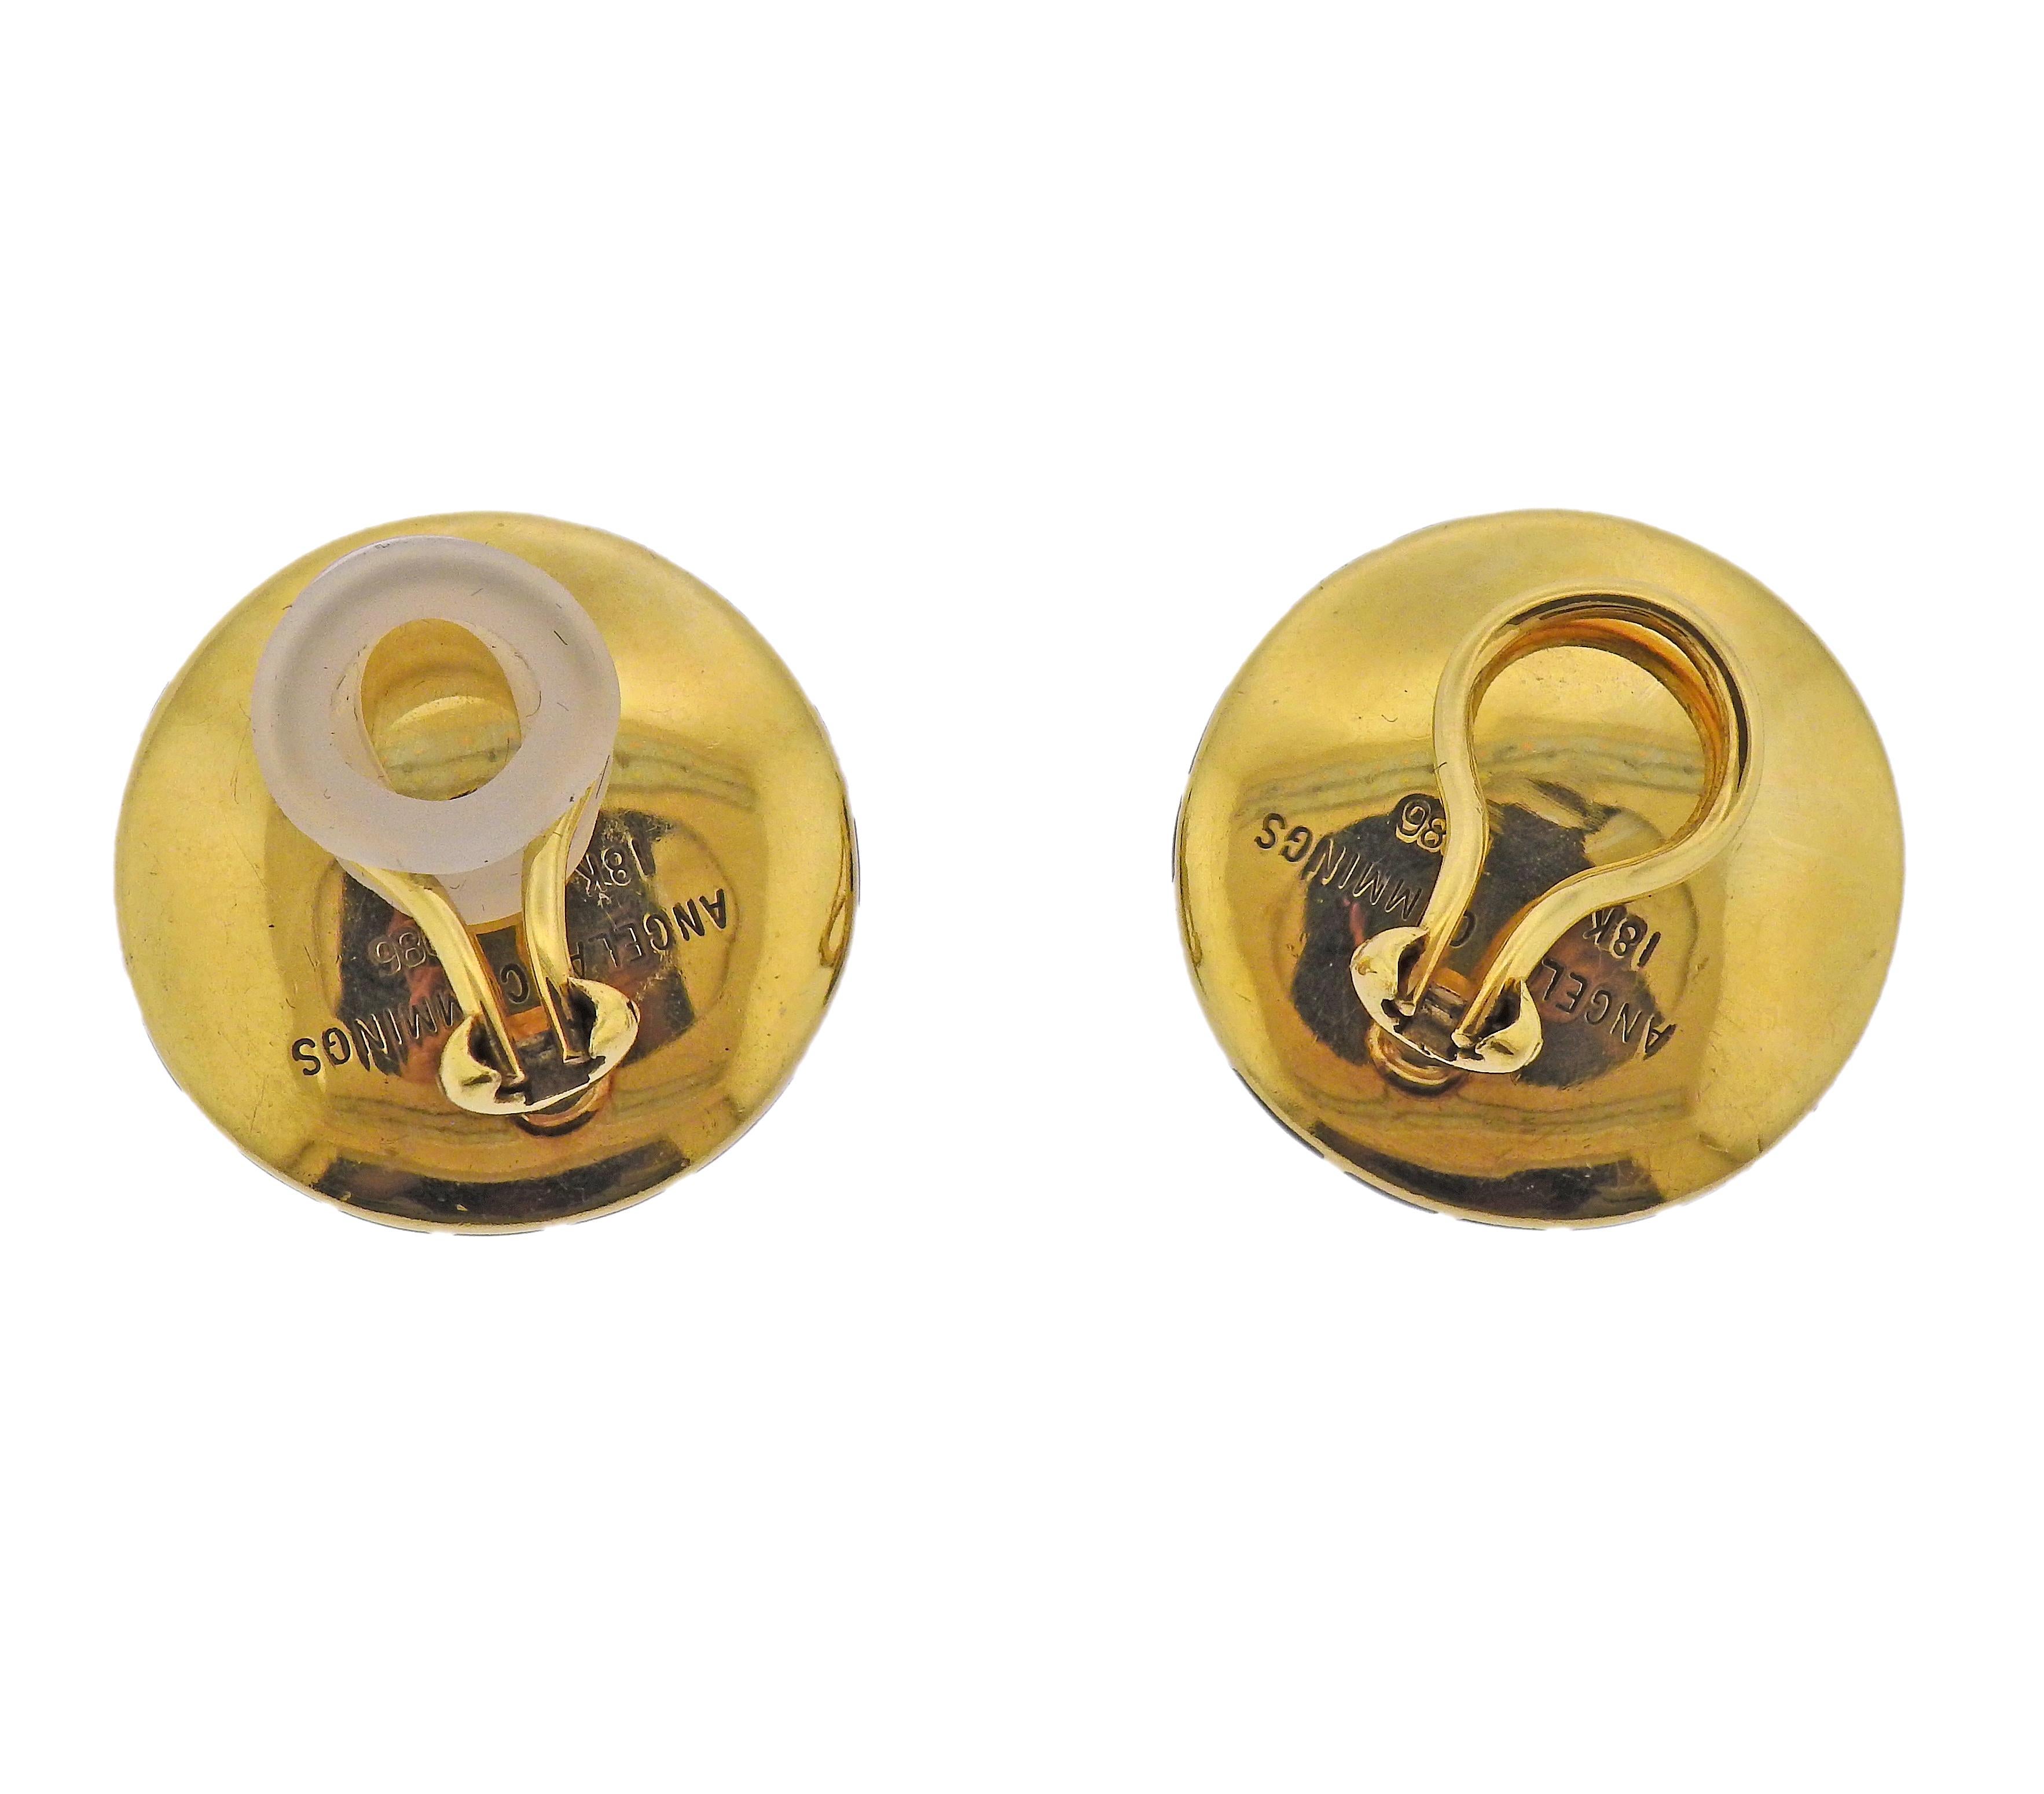 Pair of 18k gold round earrings by Angela Cummings, crafted in 1986, with inlayed black jade. Earrings are 25mm in diameter (1